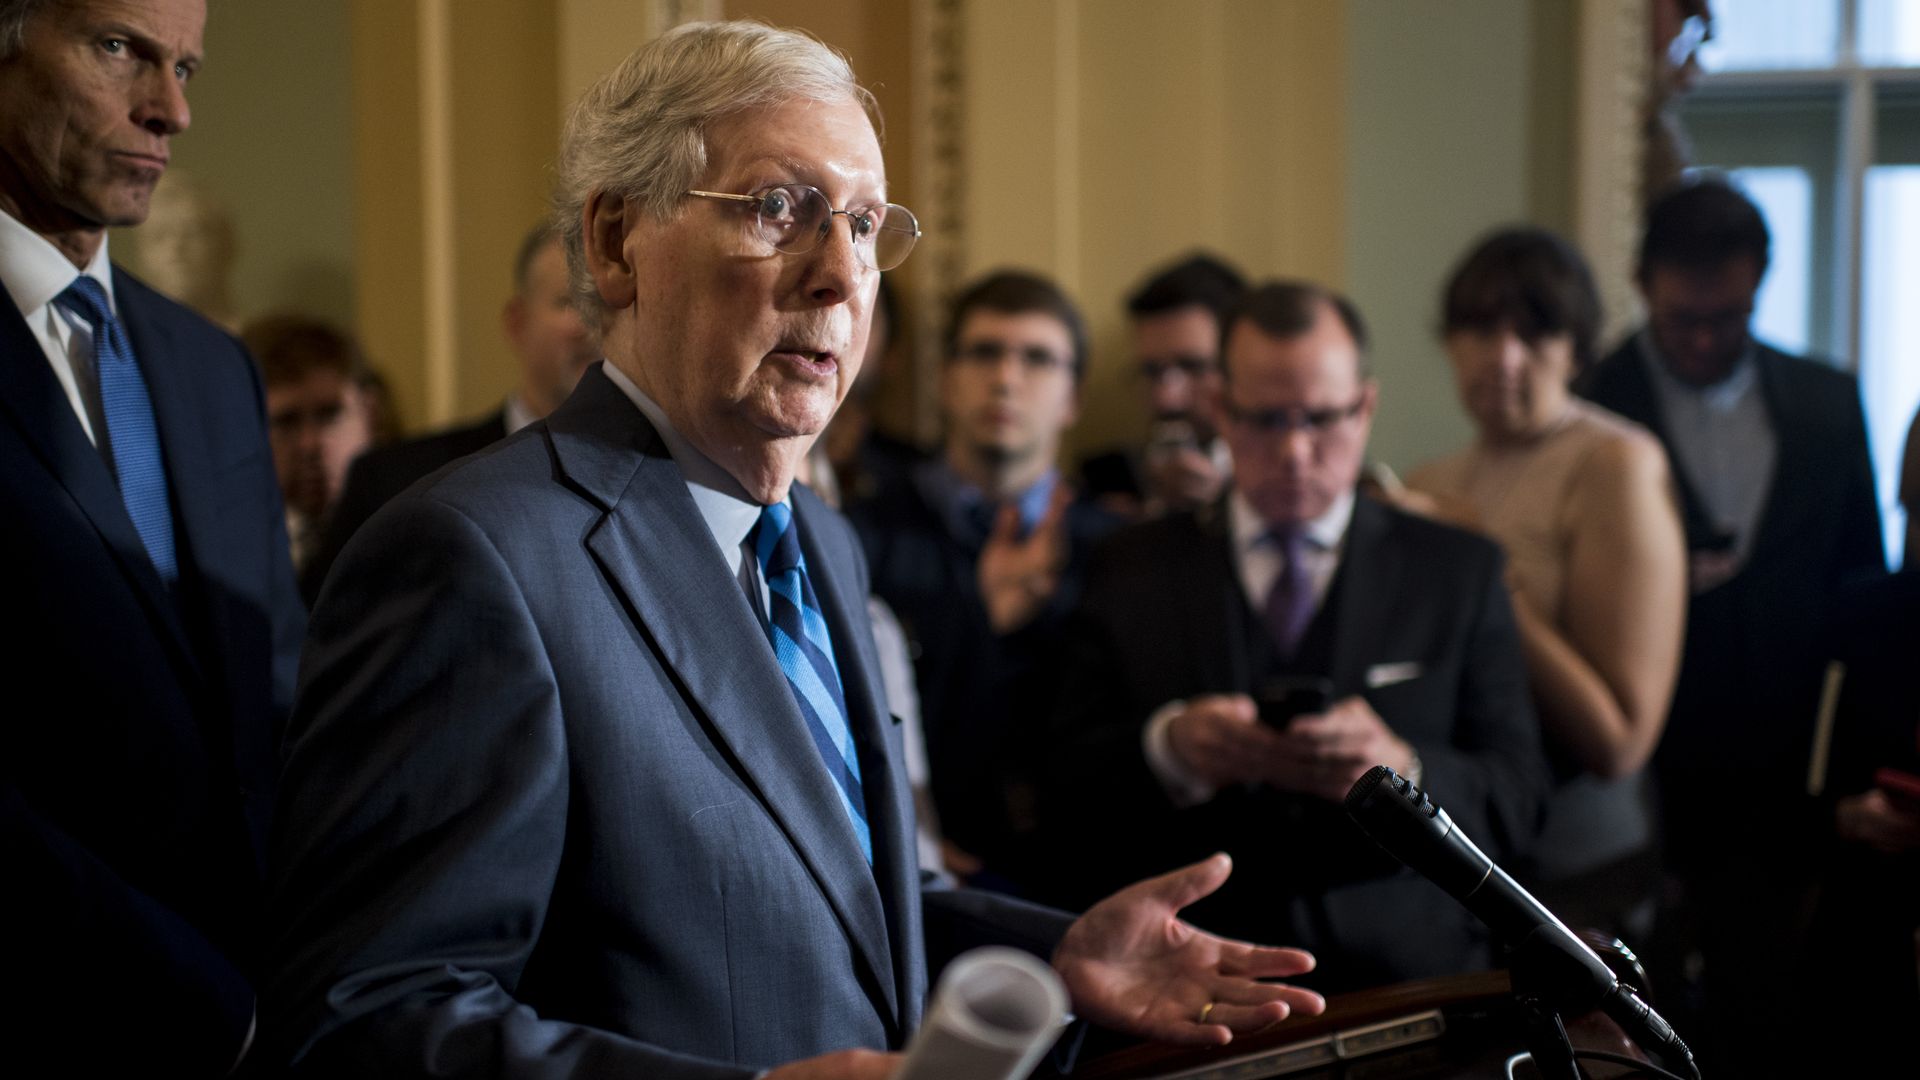  Senate Majority Leader Mitch McConnell, R-Ky., speaks during the press conference on Wednesday, Oct. 16, 2019